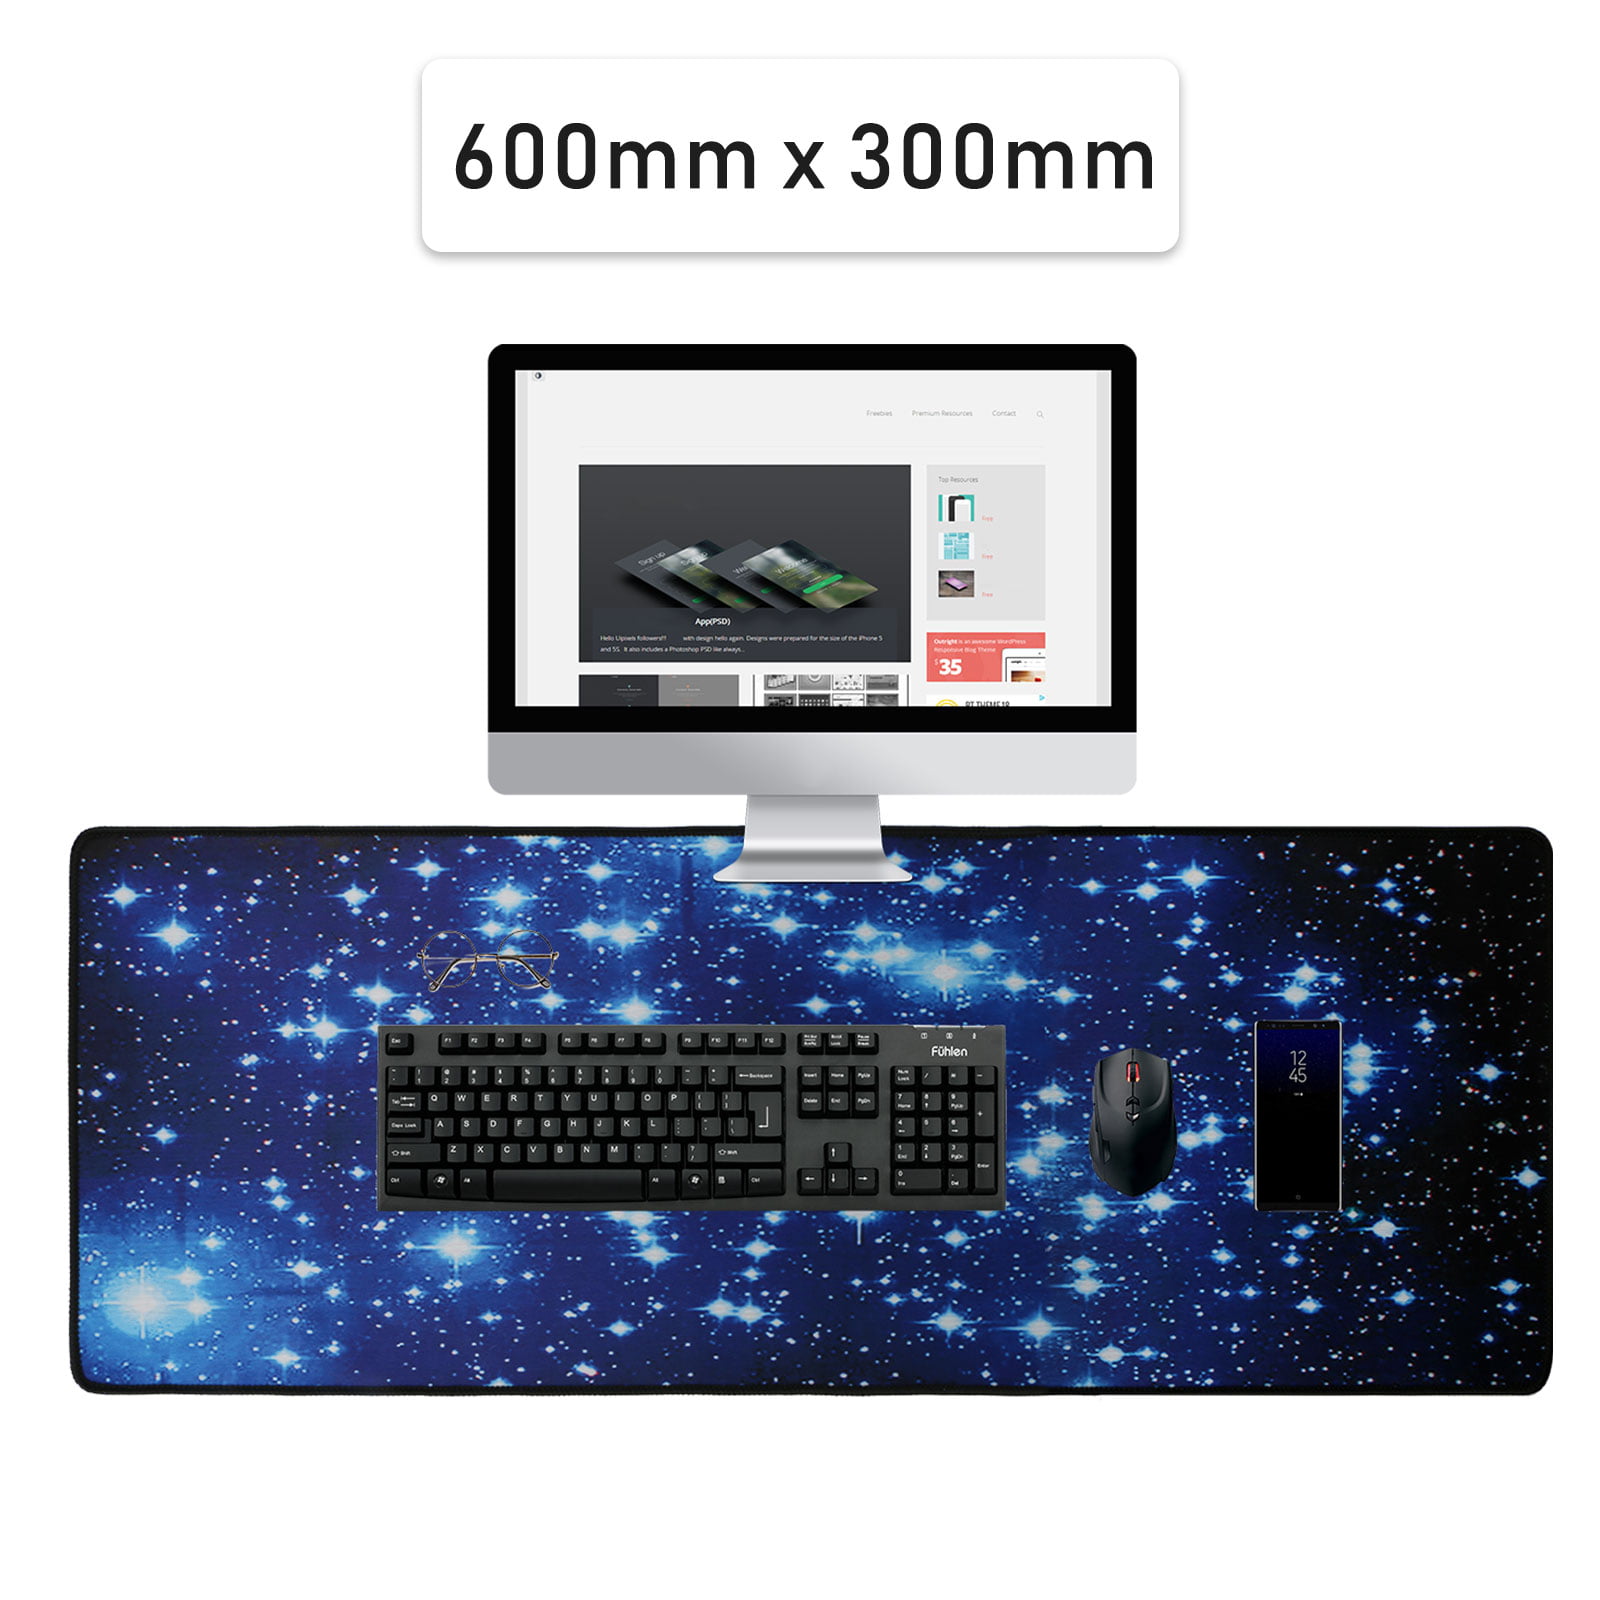 Kawaii Shiba Inu Mouse Pad Gaming Mouse Pad Non-Slip Rubber Base with Stitched Edge Computer Pc Mousepad for Home Office